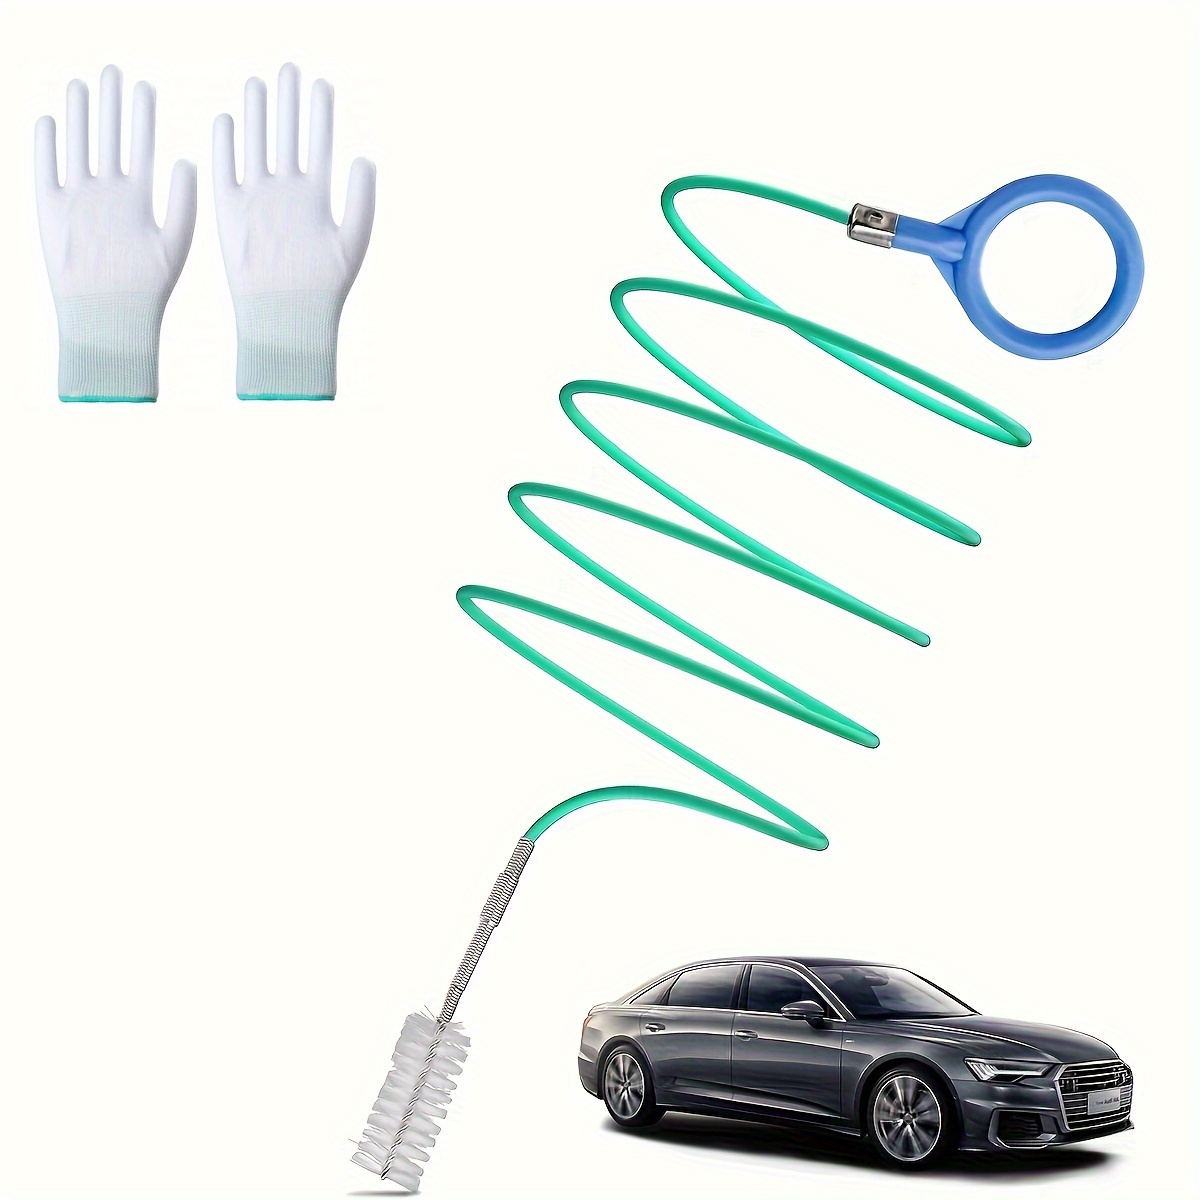 118.1inch Auto Sunroof Drain Cleaning Tool Flexible Drain Brush Long Pipe  Cleaners For Car, Tube Cleaning Brush Slim Drain Dredging Tool